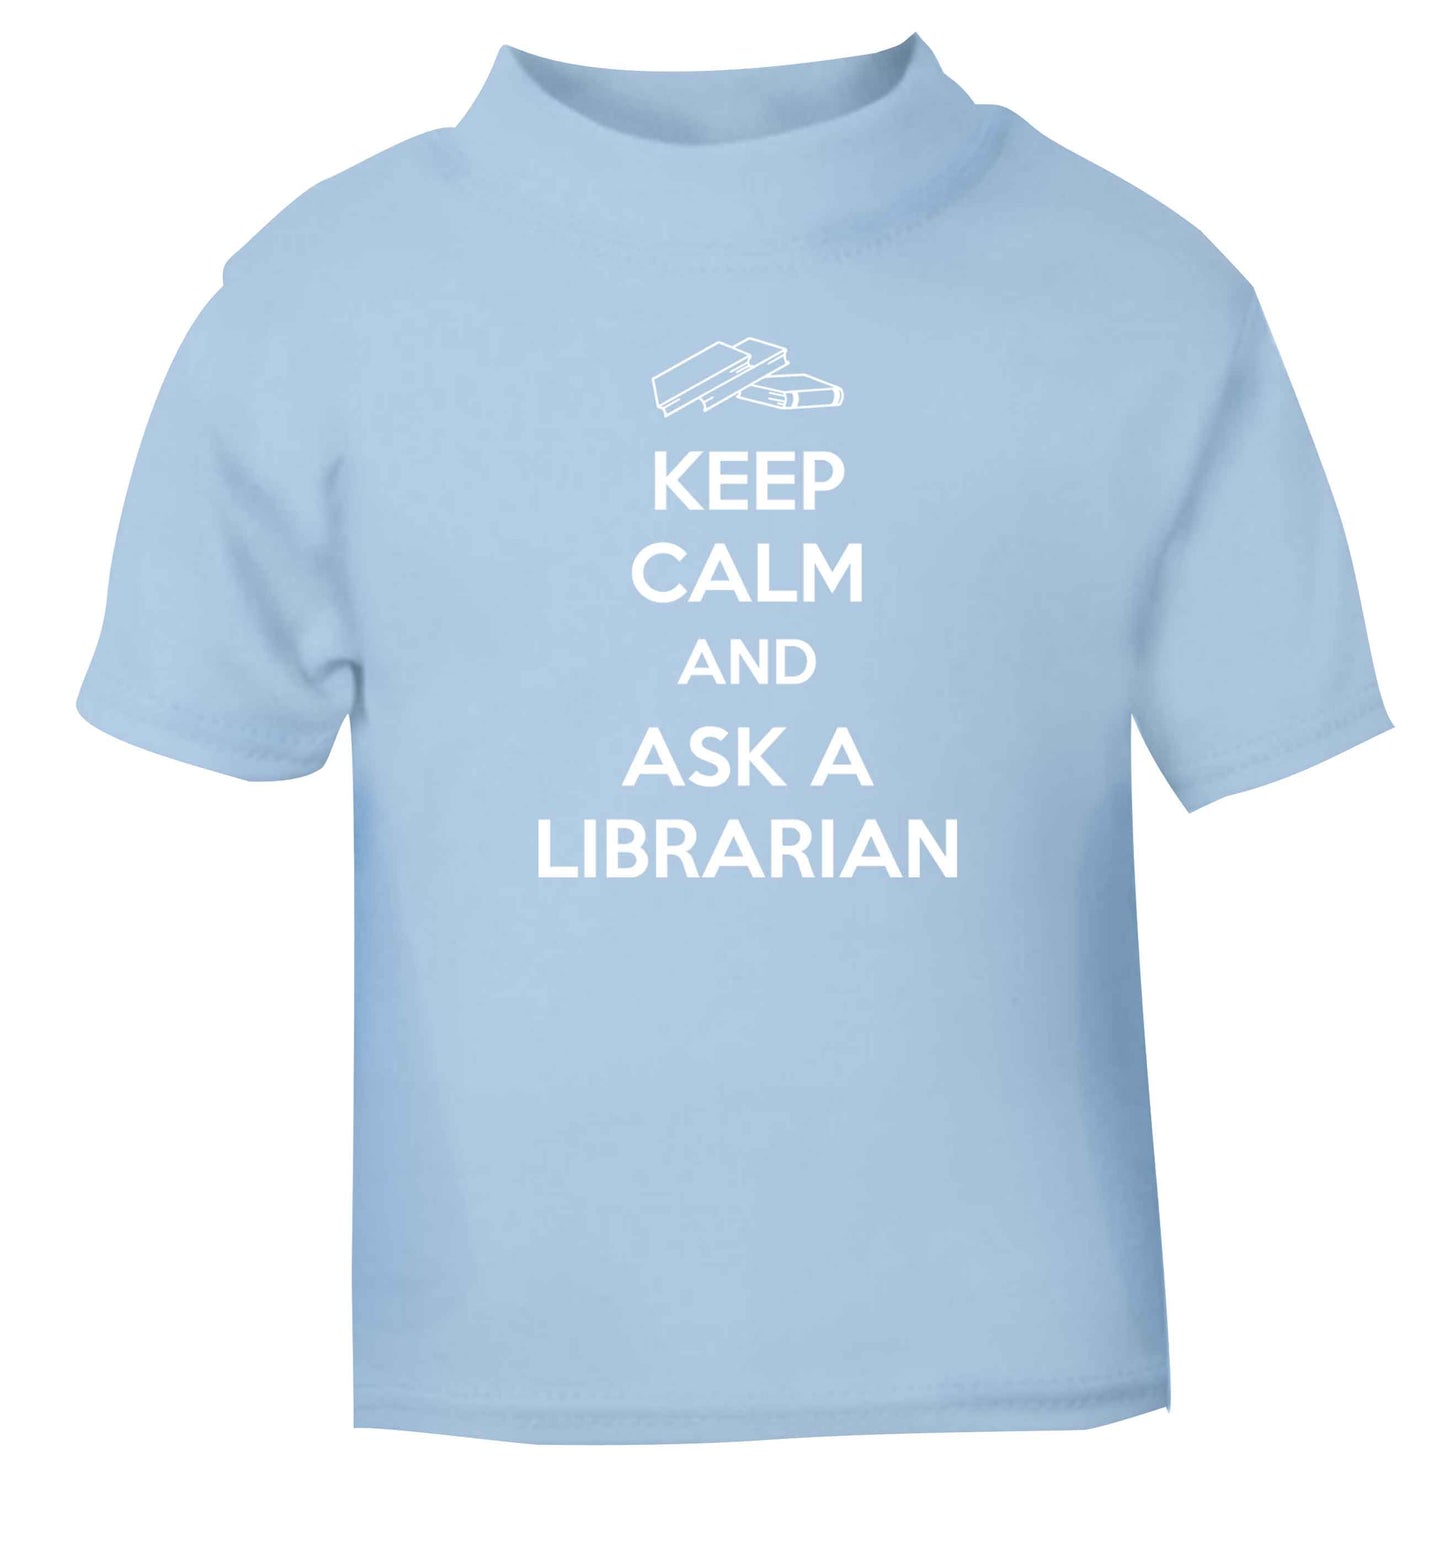 Keep calm and ask a librarian light blue Baby Toddler Tshirt 2 Years